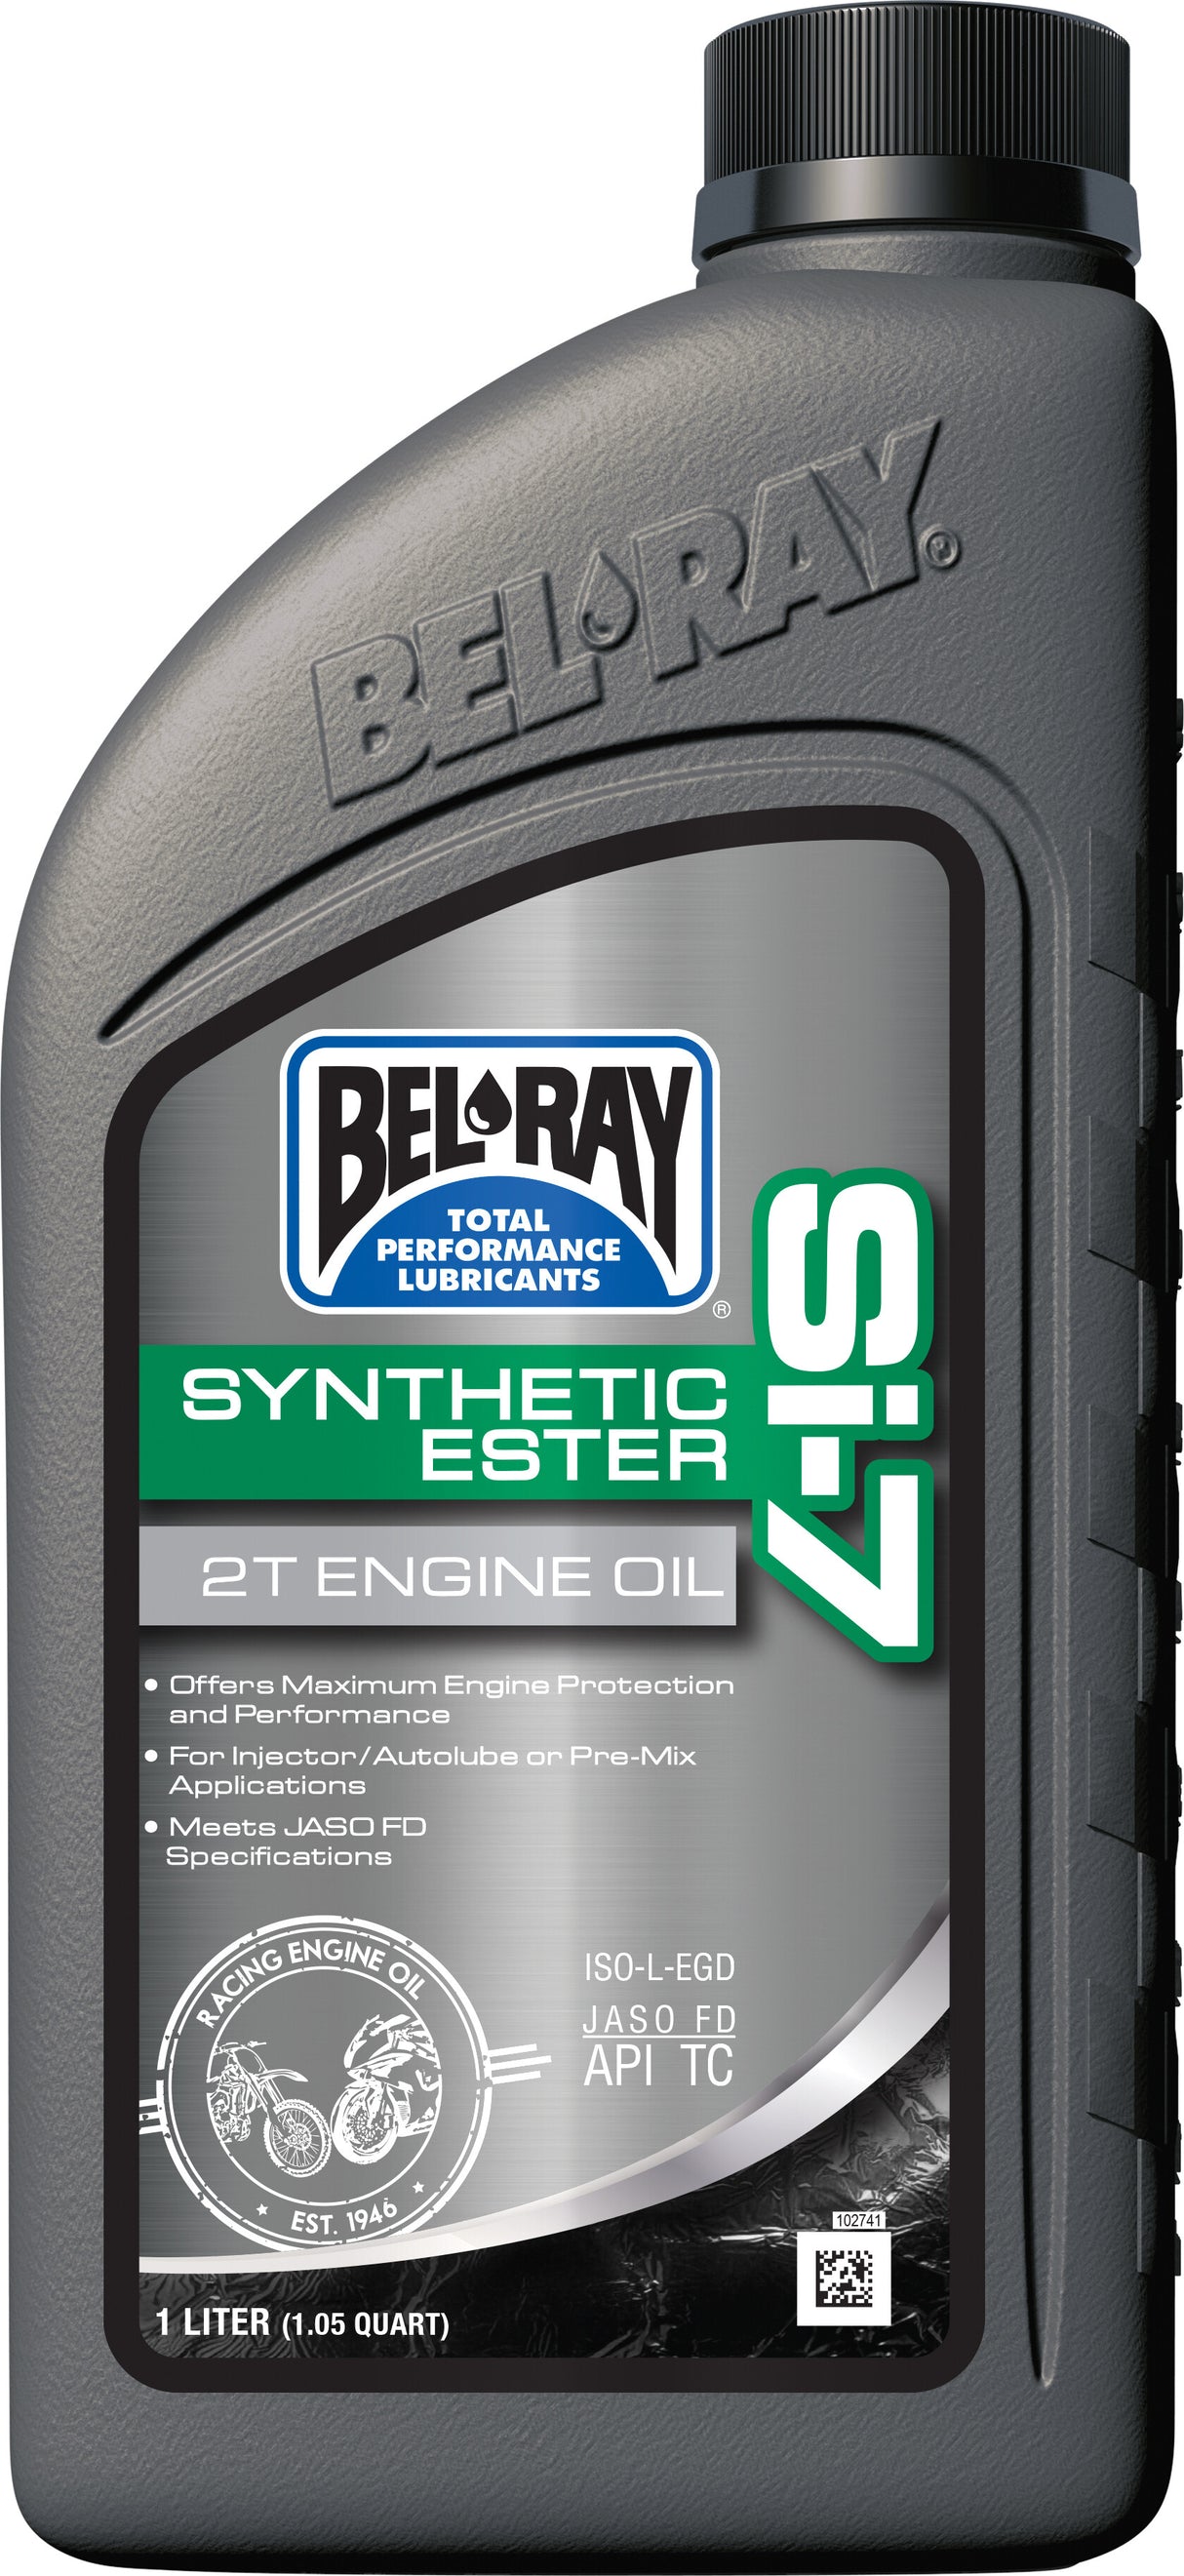 SI-7 FULL SYNTHETIC 2T ENGINE OIL 1L